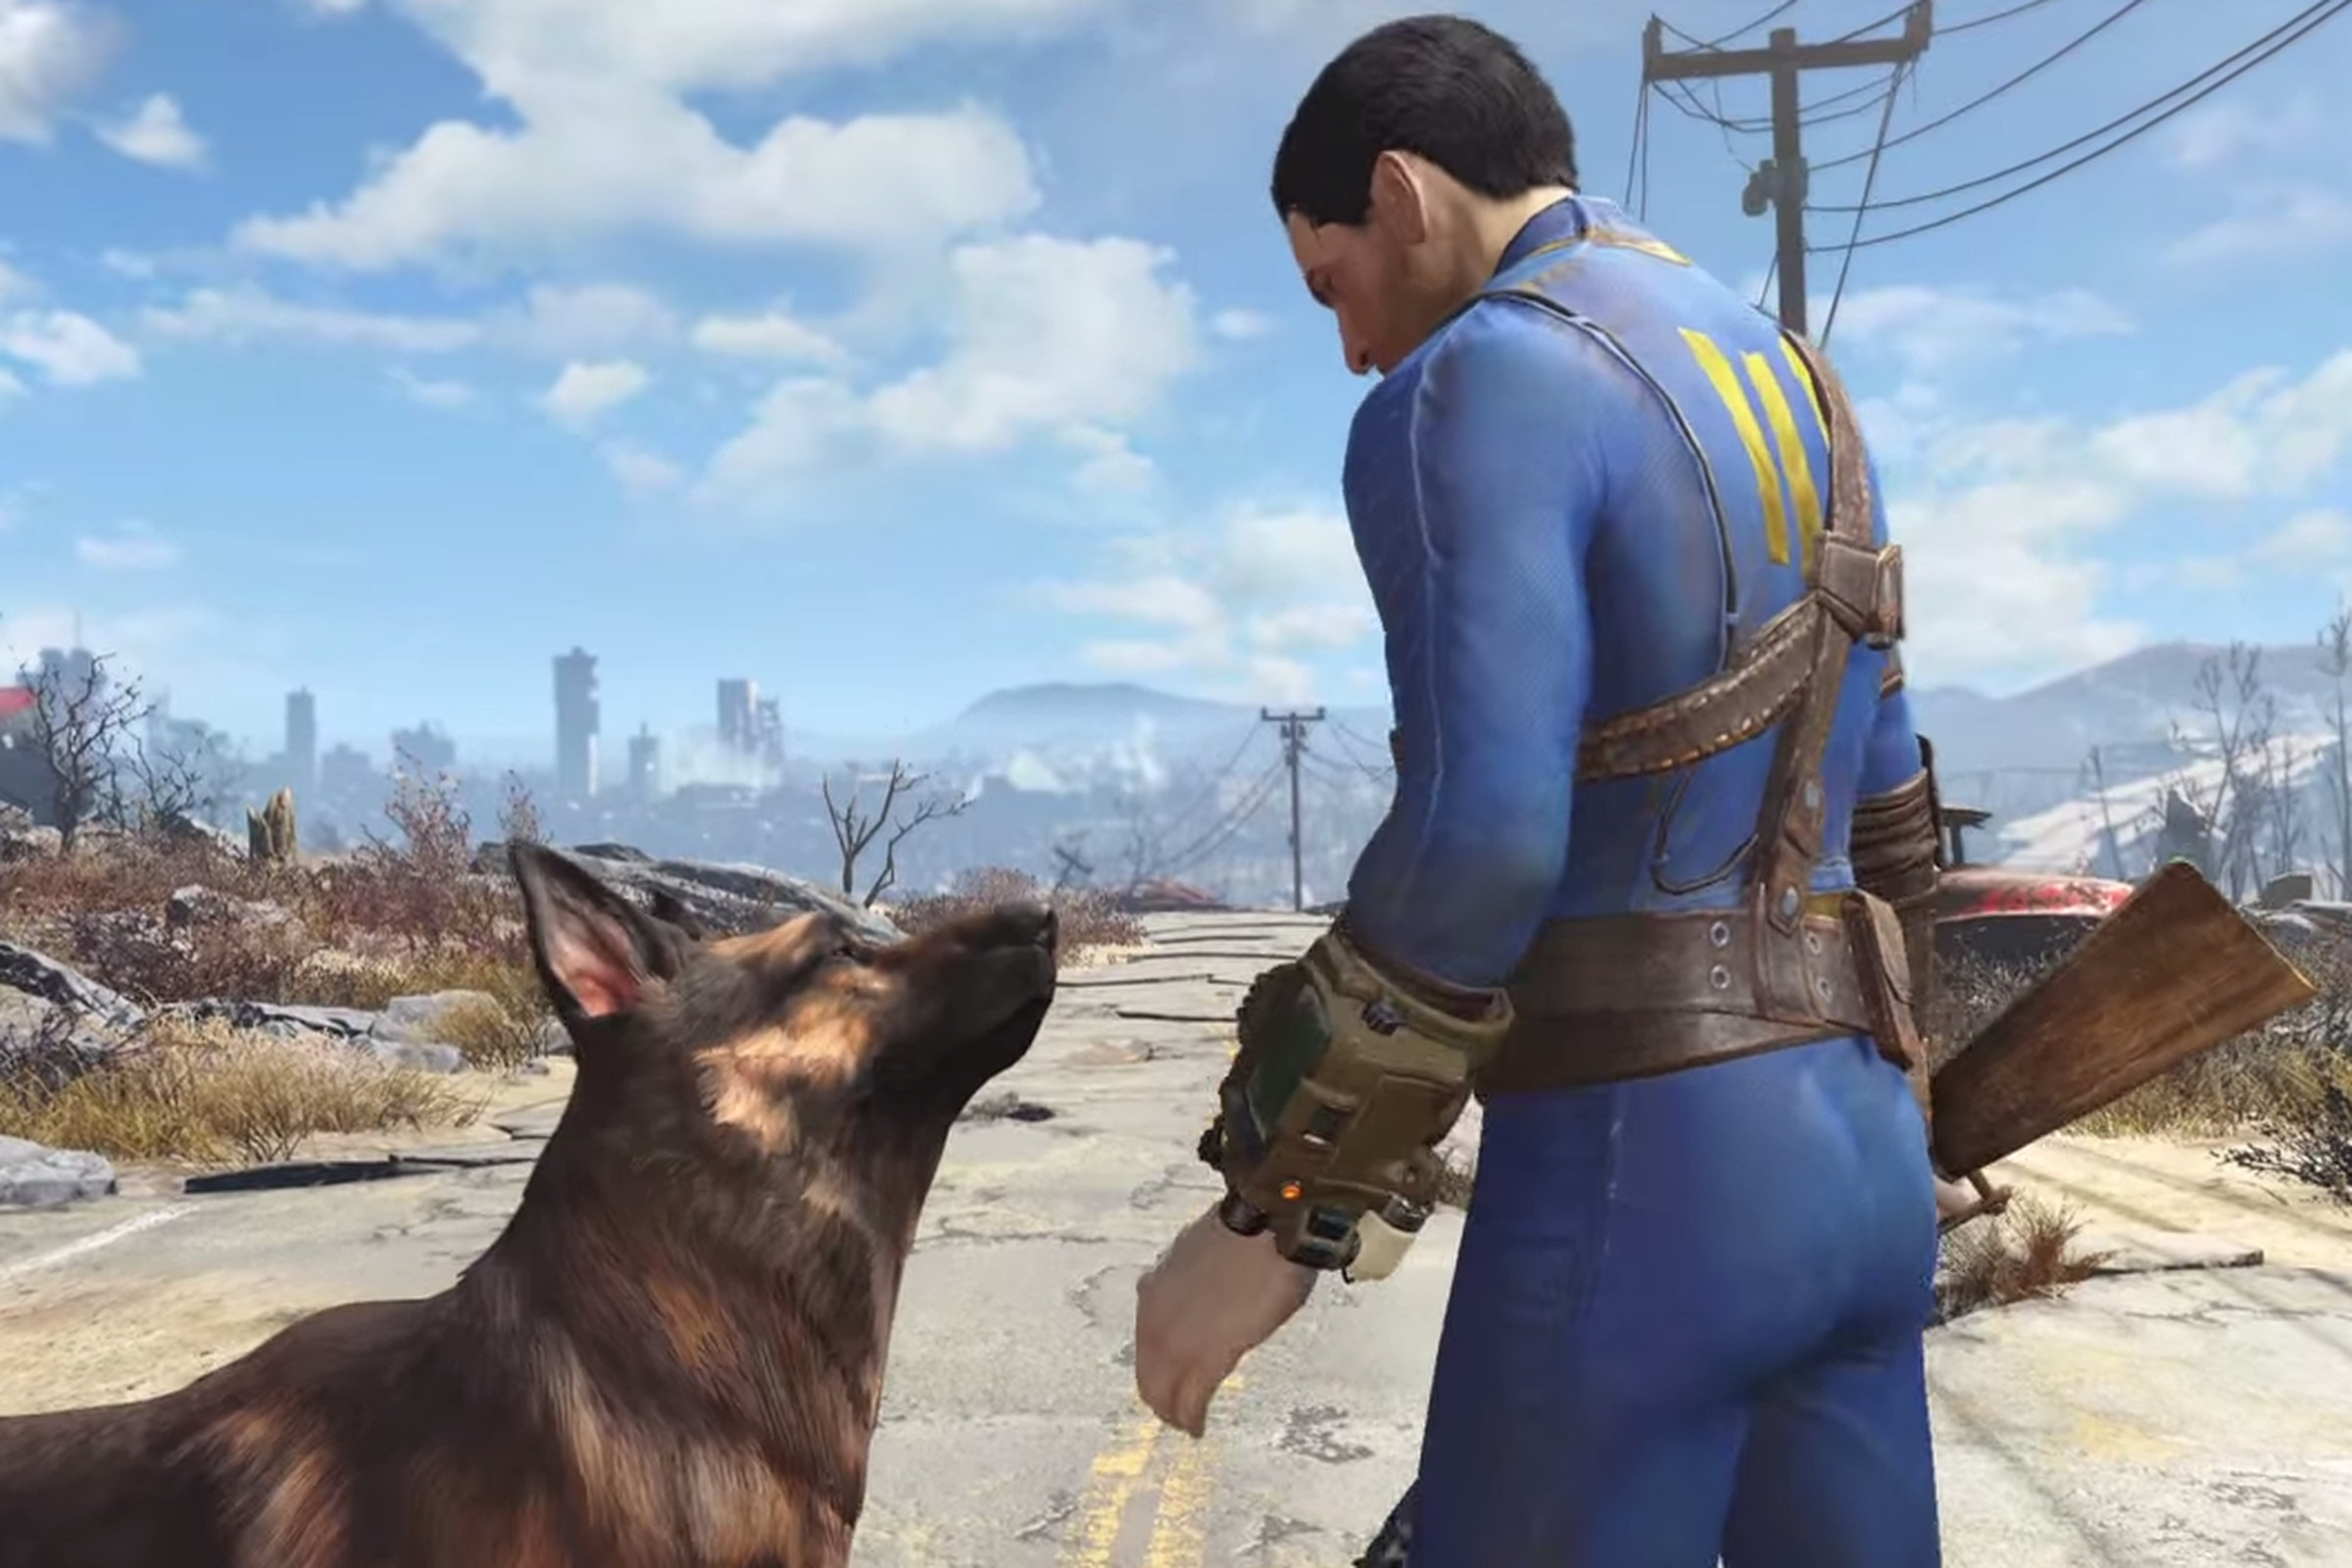 A still image from Fallout 4